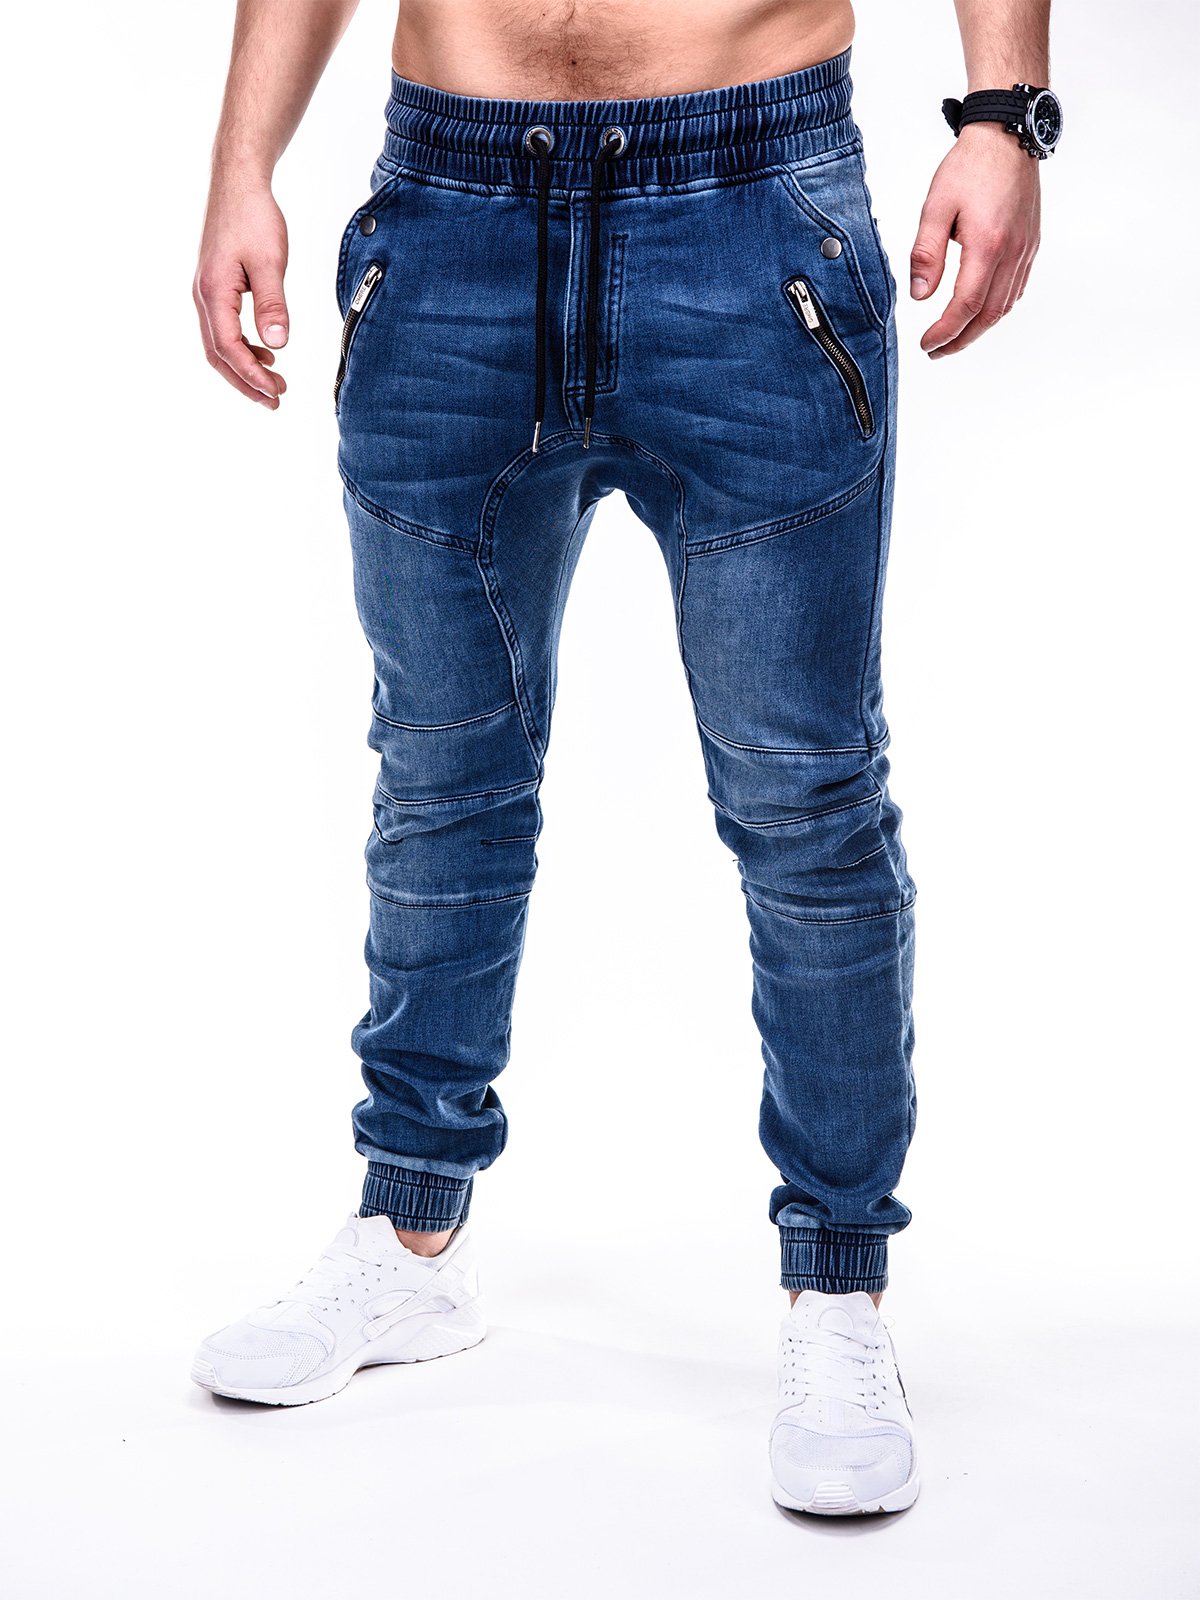 escape wipe out Dirty mens denim jogger jeans Extensively Critically skin